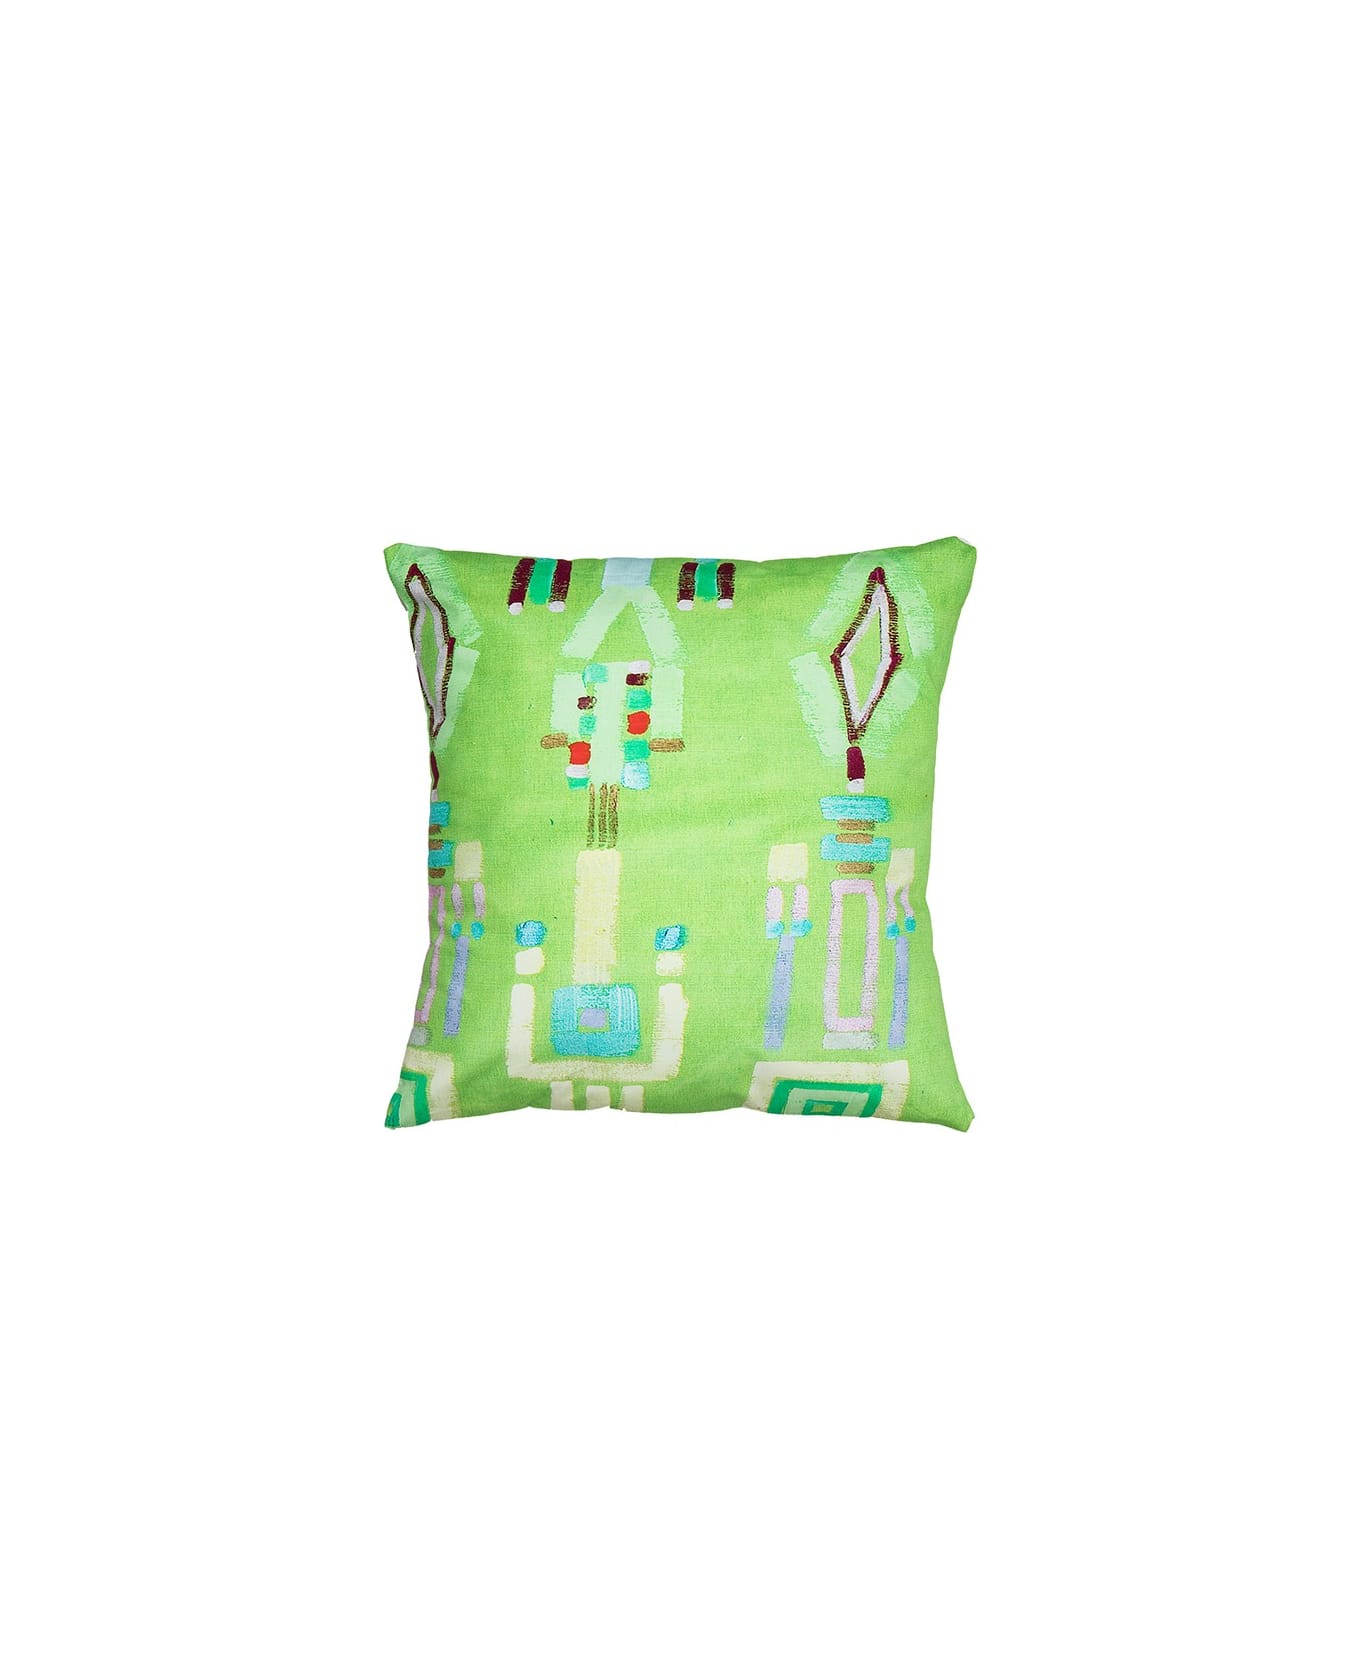 Le Botteghe su Gologone Printed Cushions 40x40 Cm - Lime Green クッション